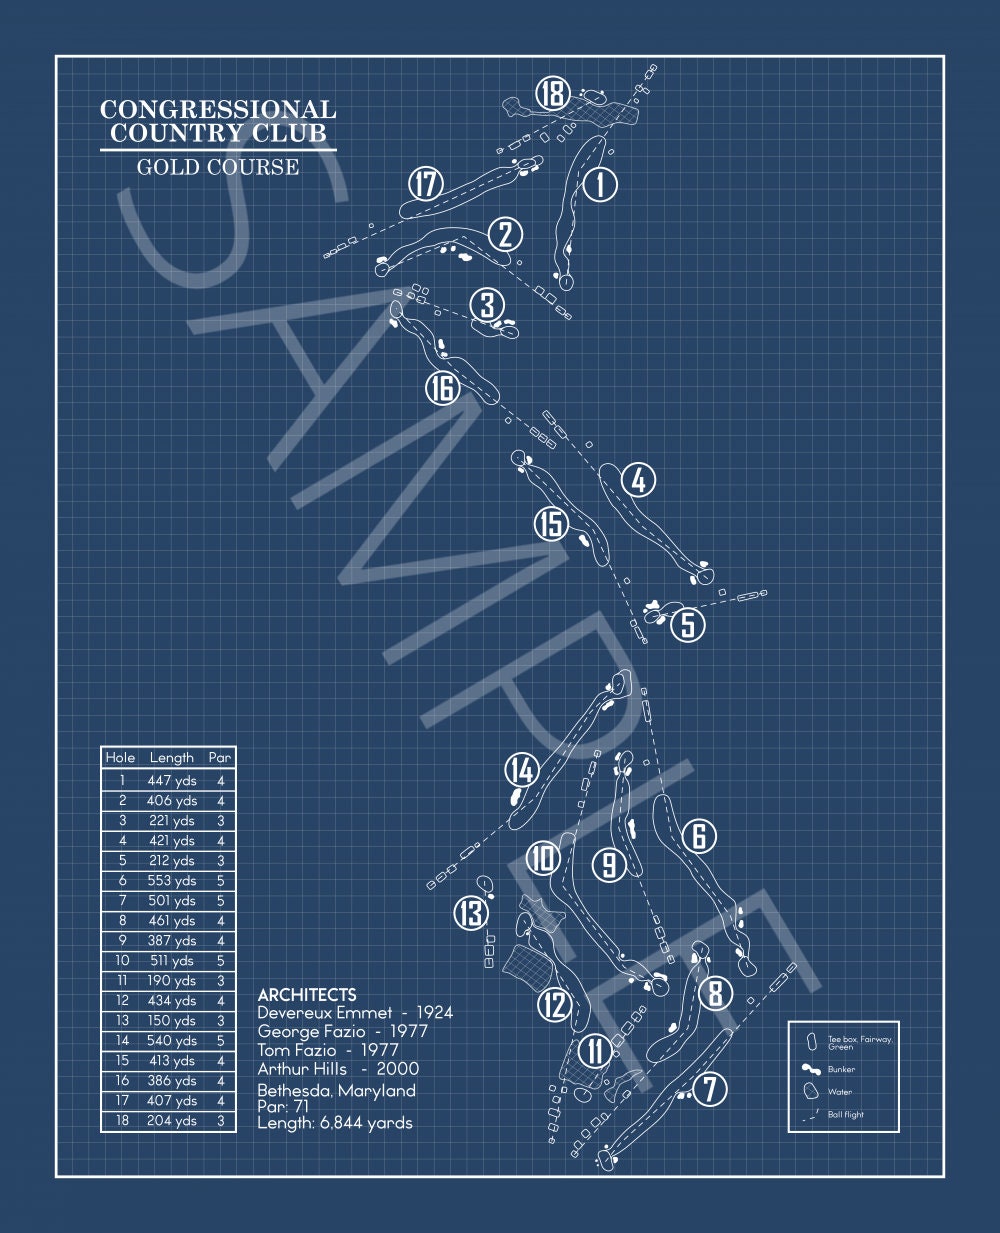 Congressional Country Club Gold Course Blueprint (Print)